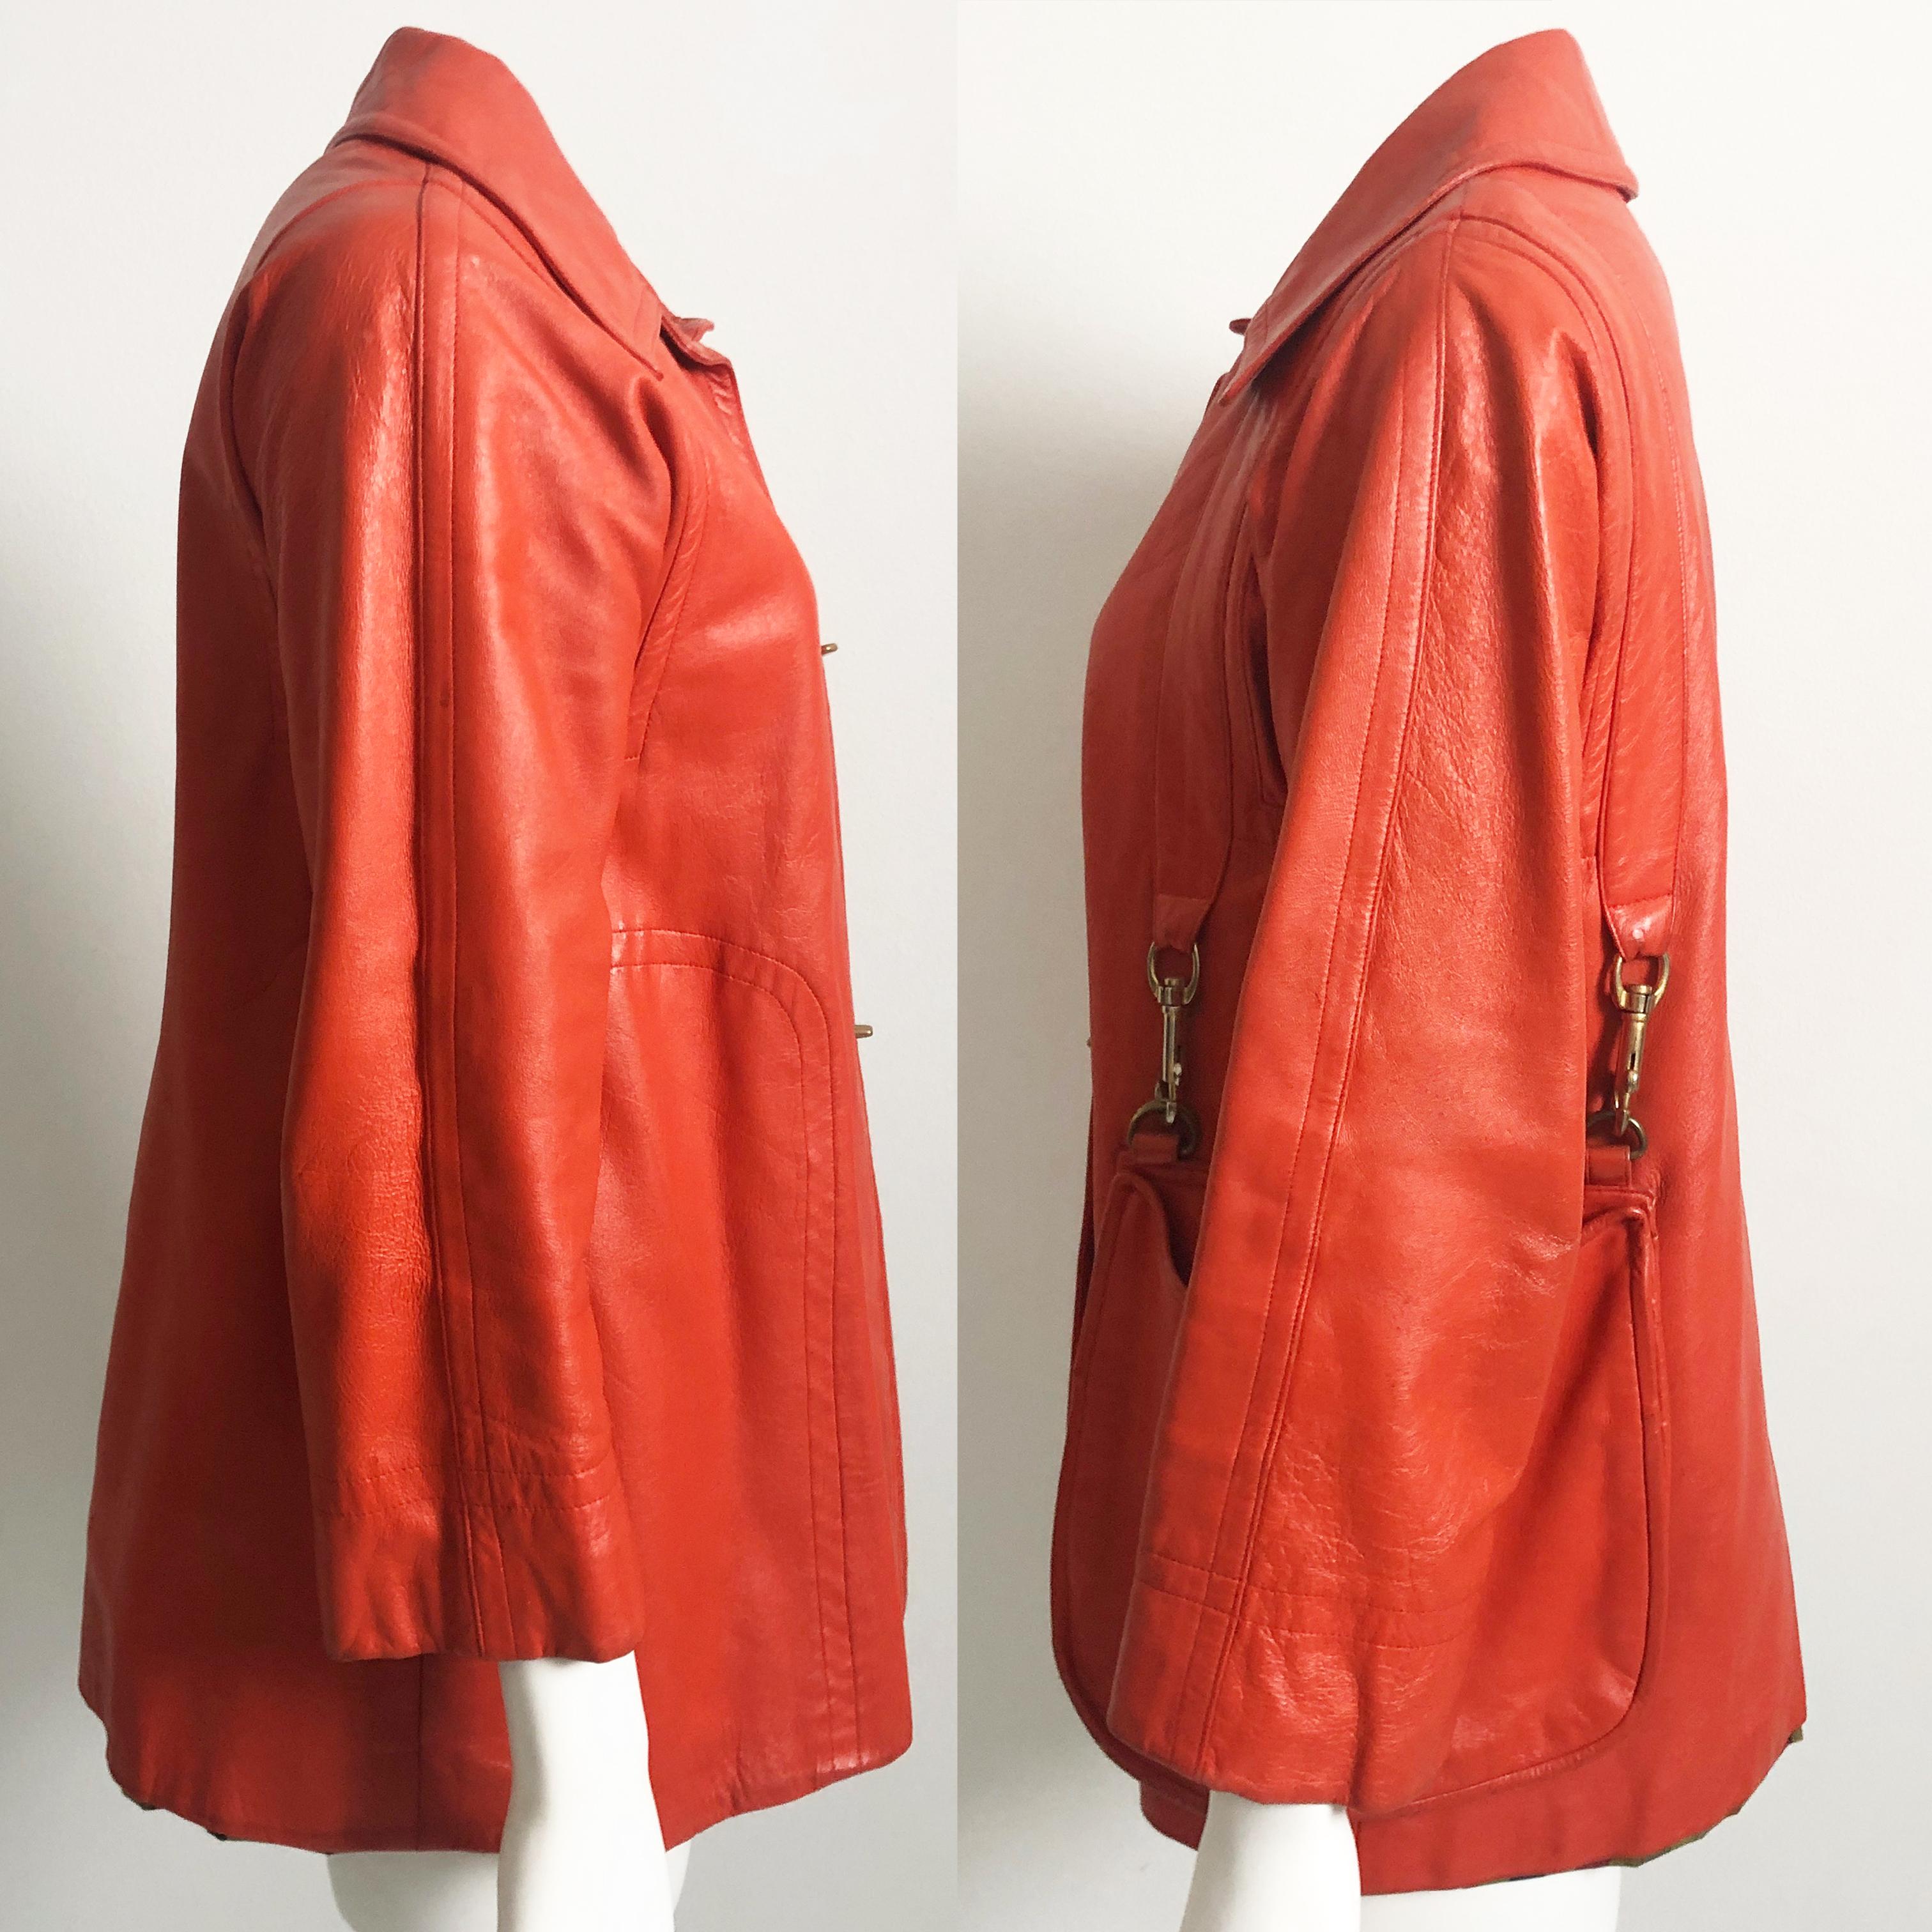 Bonnie Cashin Leather Jacket with Attached Hobo Bag Size S Mod Vintage 60s Rare  For Sale 5